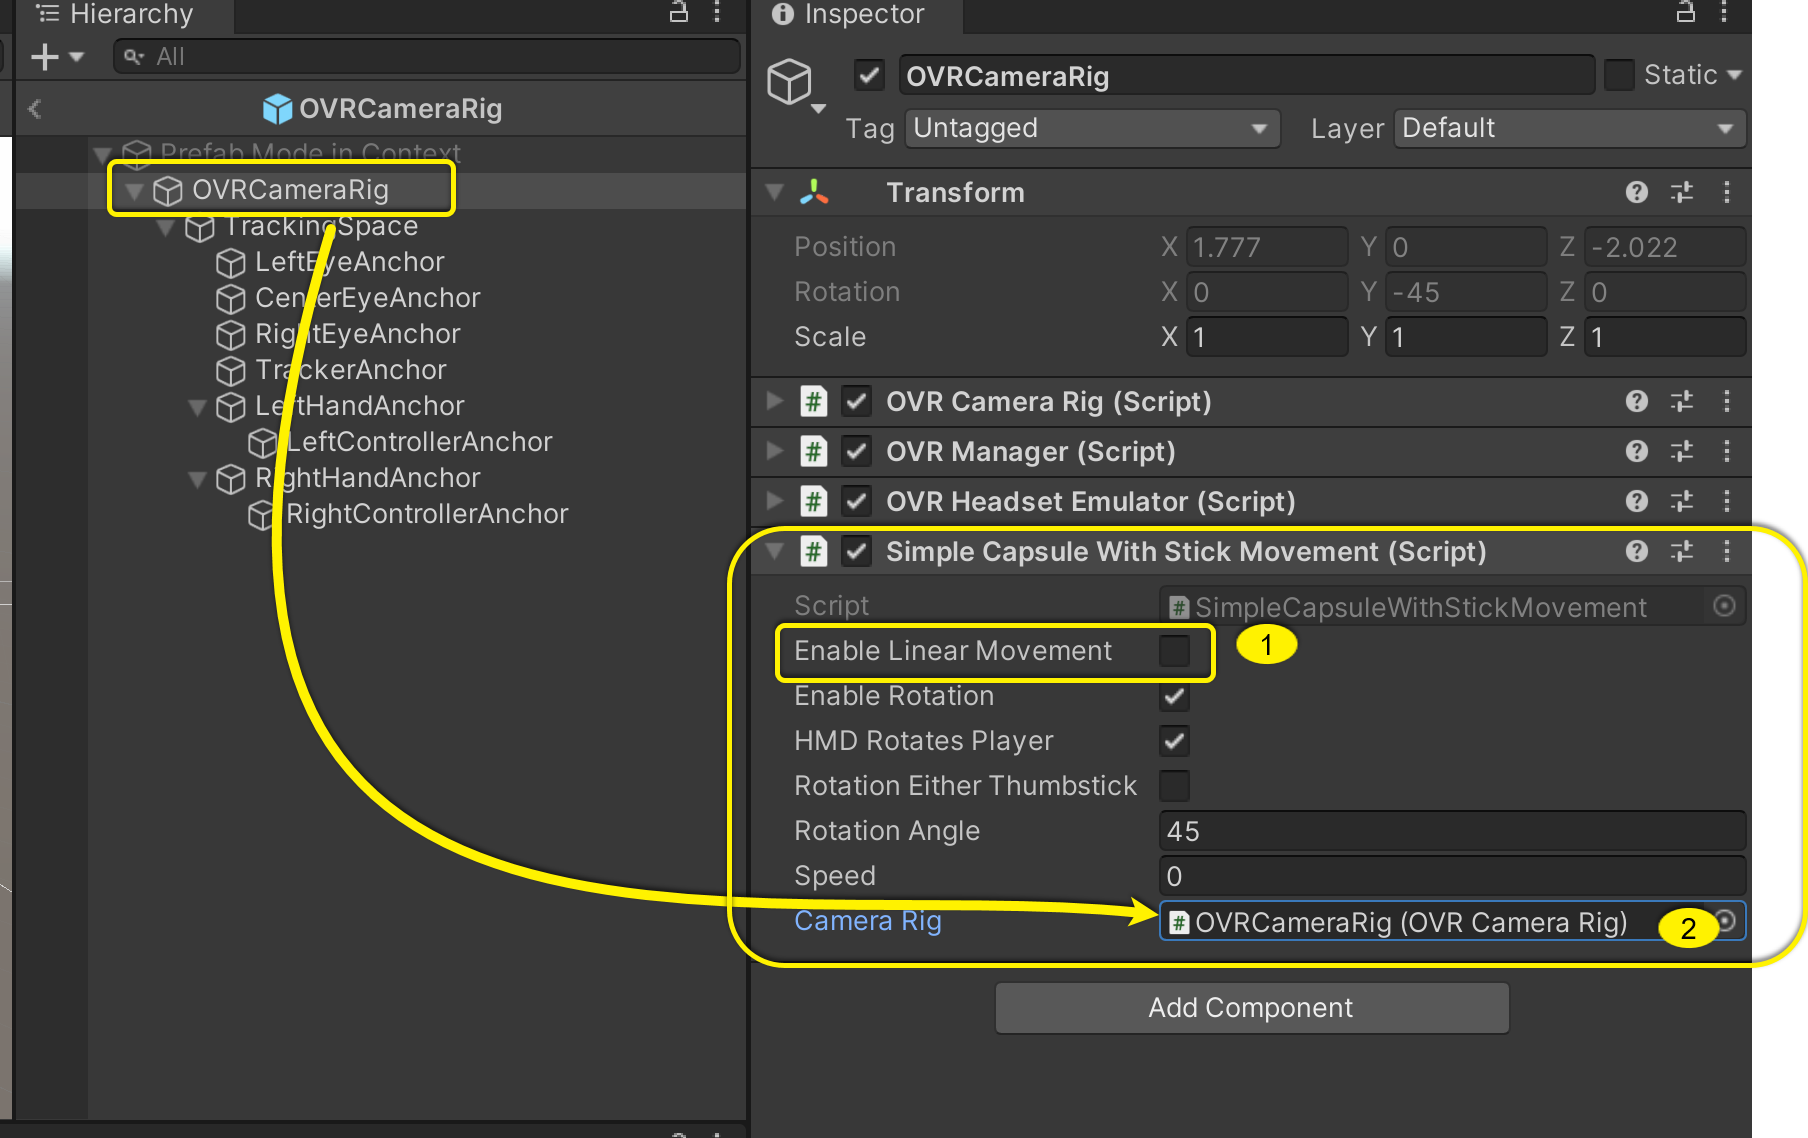 Screenshot of Unity Editor showing the first step is to check Enable Linear Movement checkbox. Second is the arrow pointing from OVRCameraRig in Hierachy to Camera Rig field under Simple Capsule with Stick Movement in Inspector.